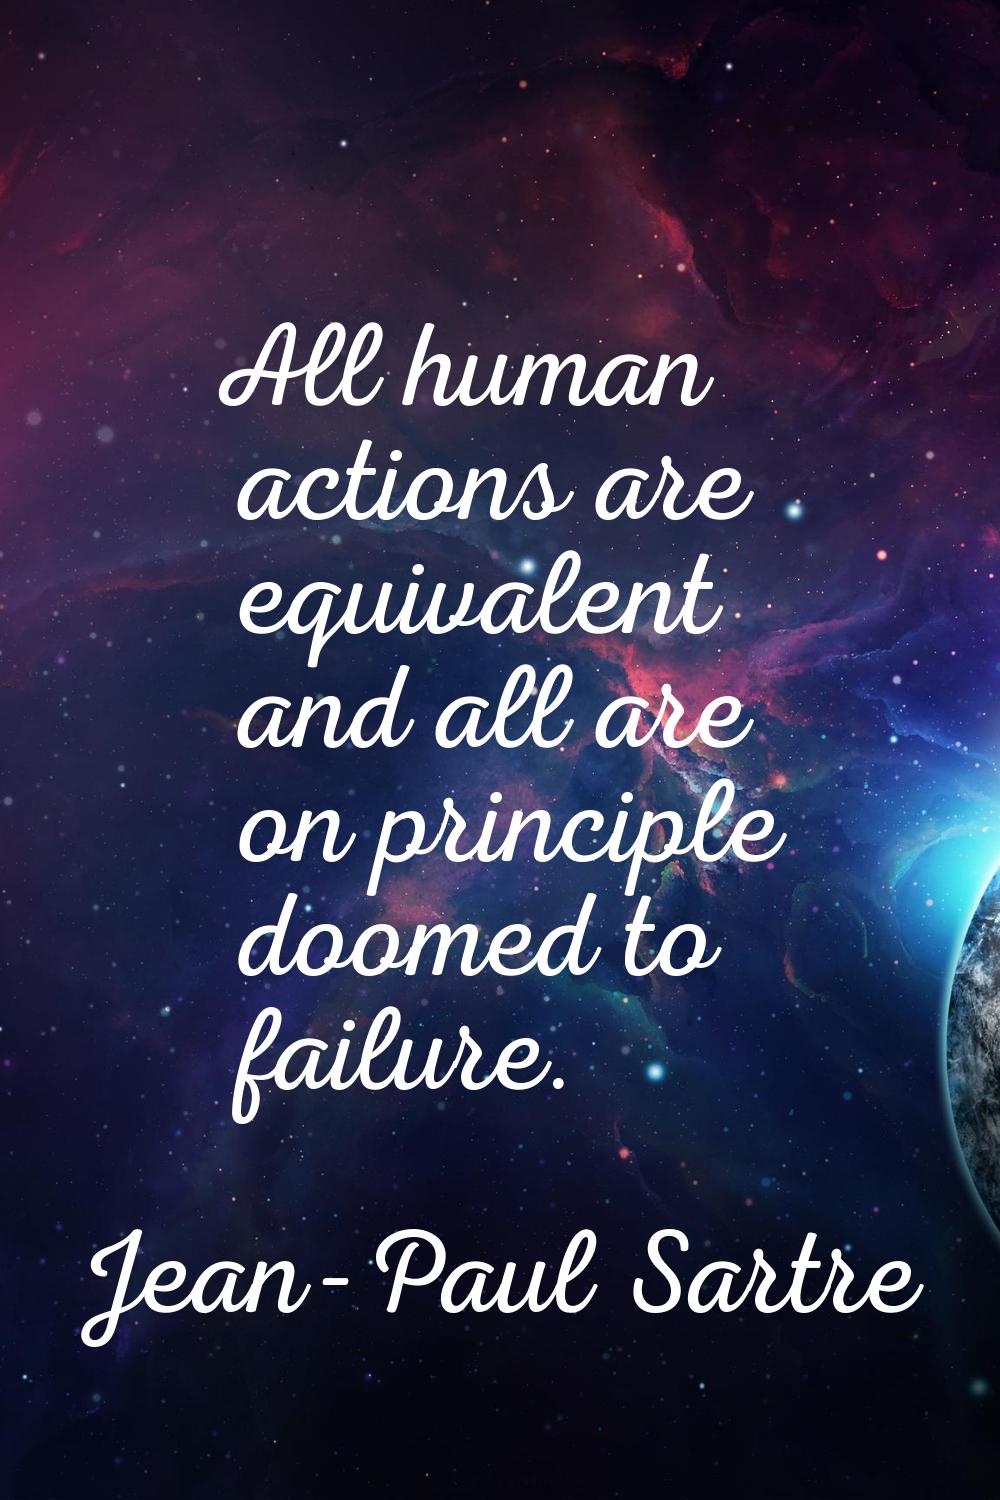 All human actions are equivalent and all are on principle doomed to failure.